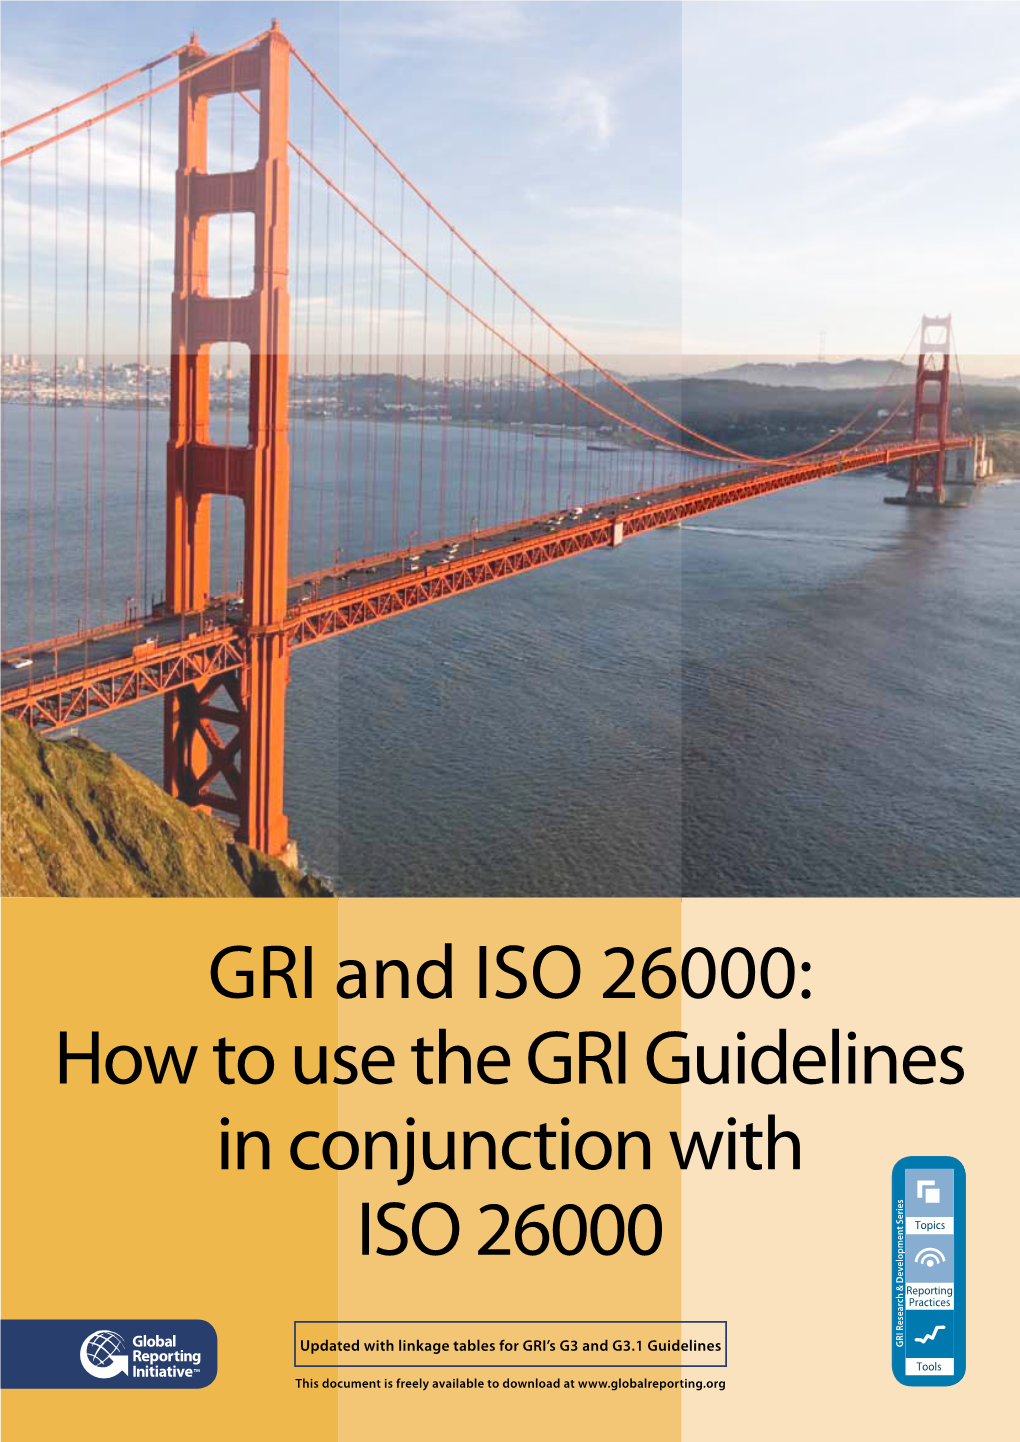 How to Use the GRI Guidelines in Conjunction with ISO 26000